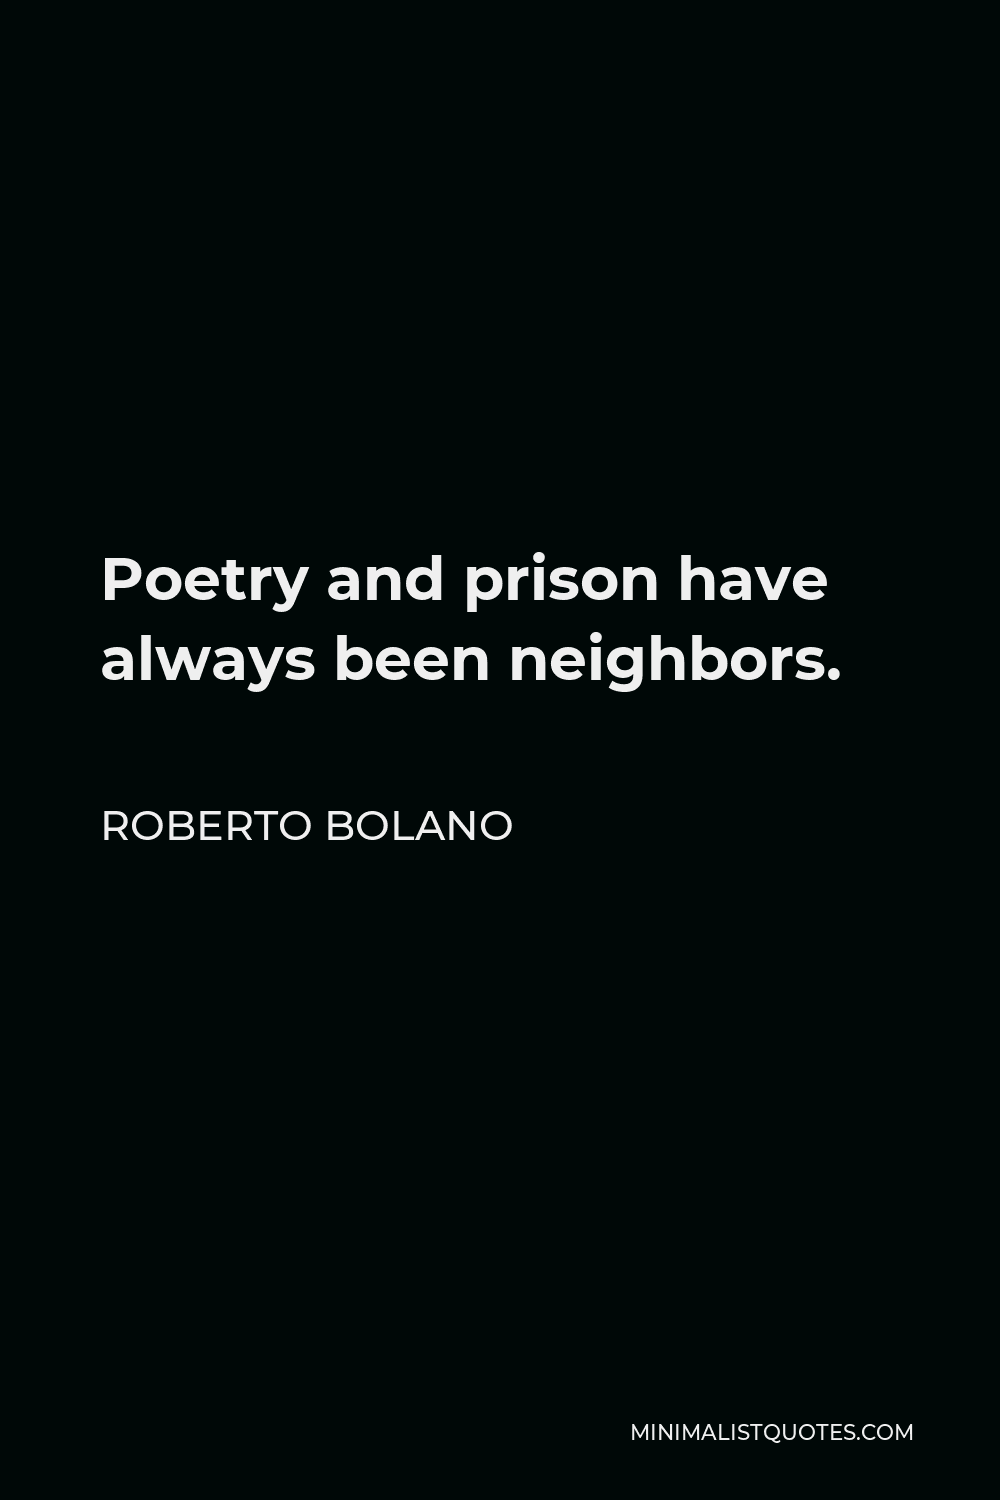 Roberto Bolano Quote - Poetry and prison have always been neighbors.